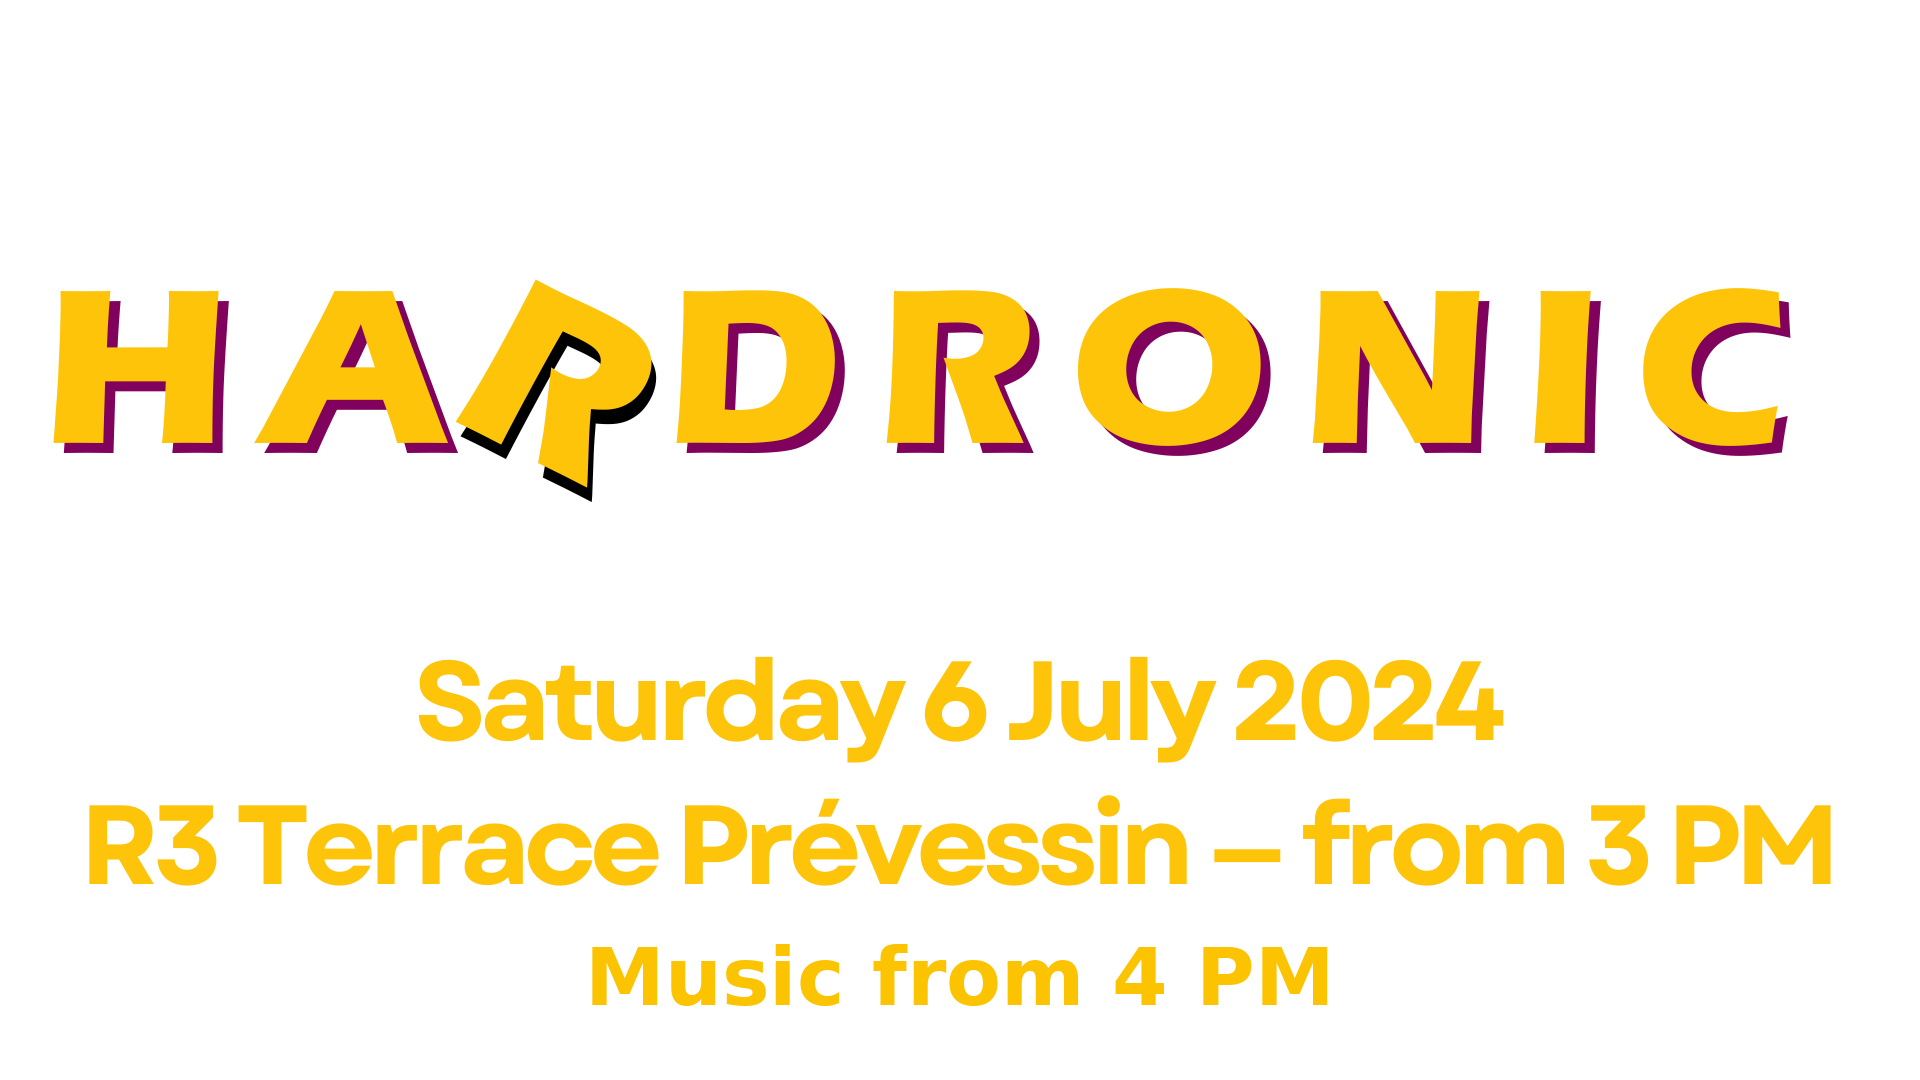 CERN MusiClub presents... Hardronic Music Festival vol.2024. Saturday 6th July 2024. R3 Terrace Prévessin - from 4pm.